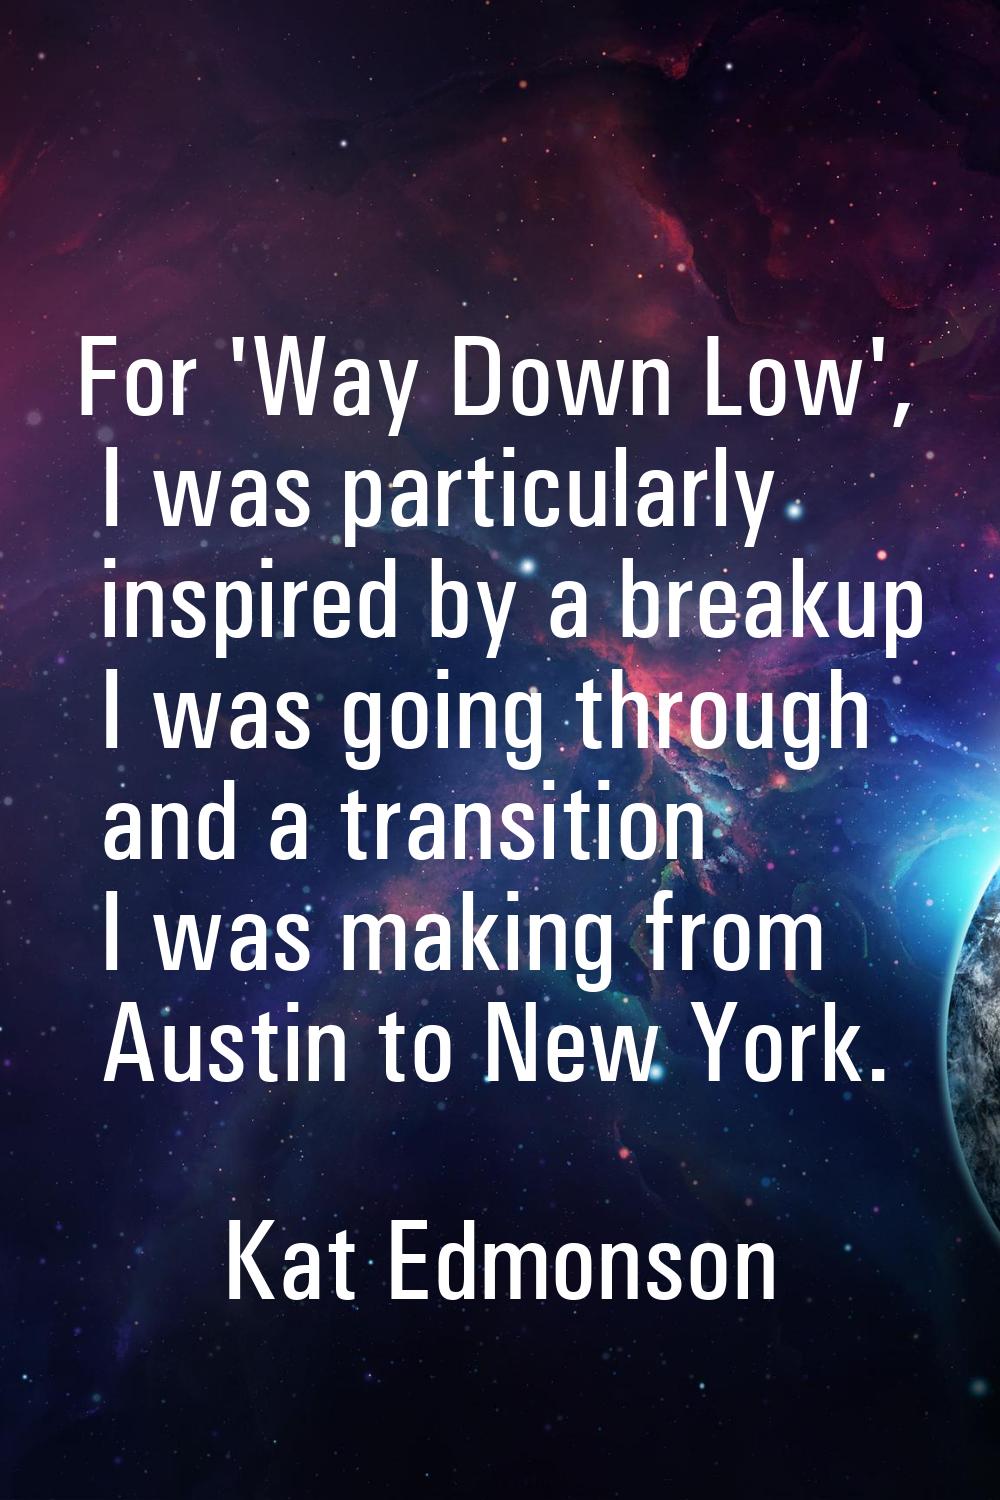 For 'Way Down Low', I was particularly inspired by a breakup I was going through and a transition I